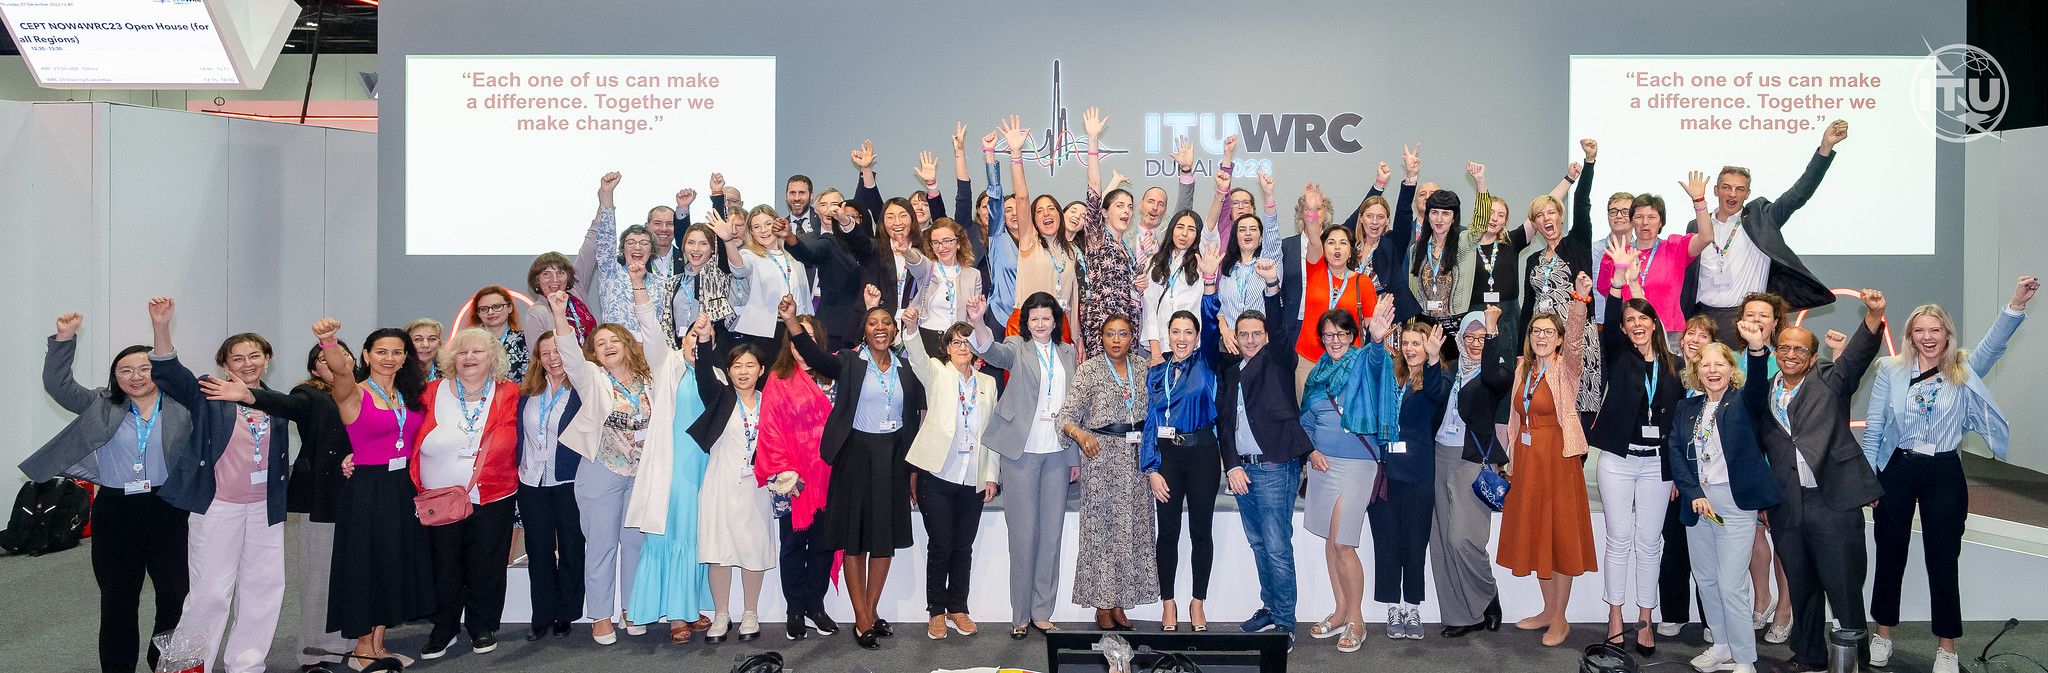 Women and girls in science: ITU aims for gender equality featured image